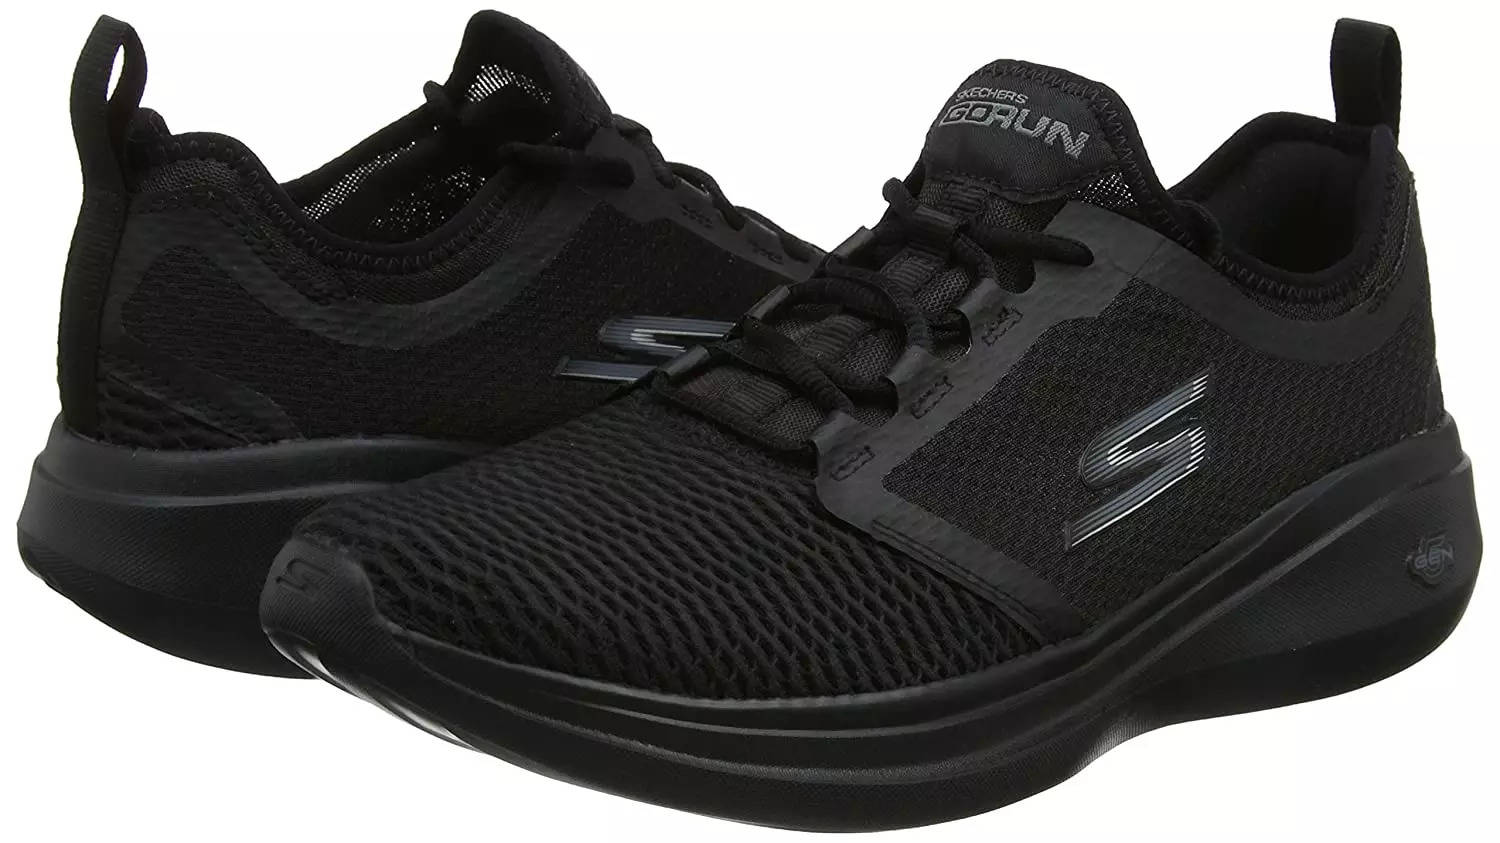 Running shoes for men: Best Running Shoes for Men by Sketchers: Up to ...